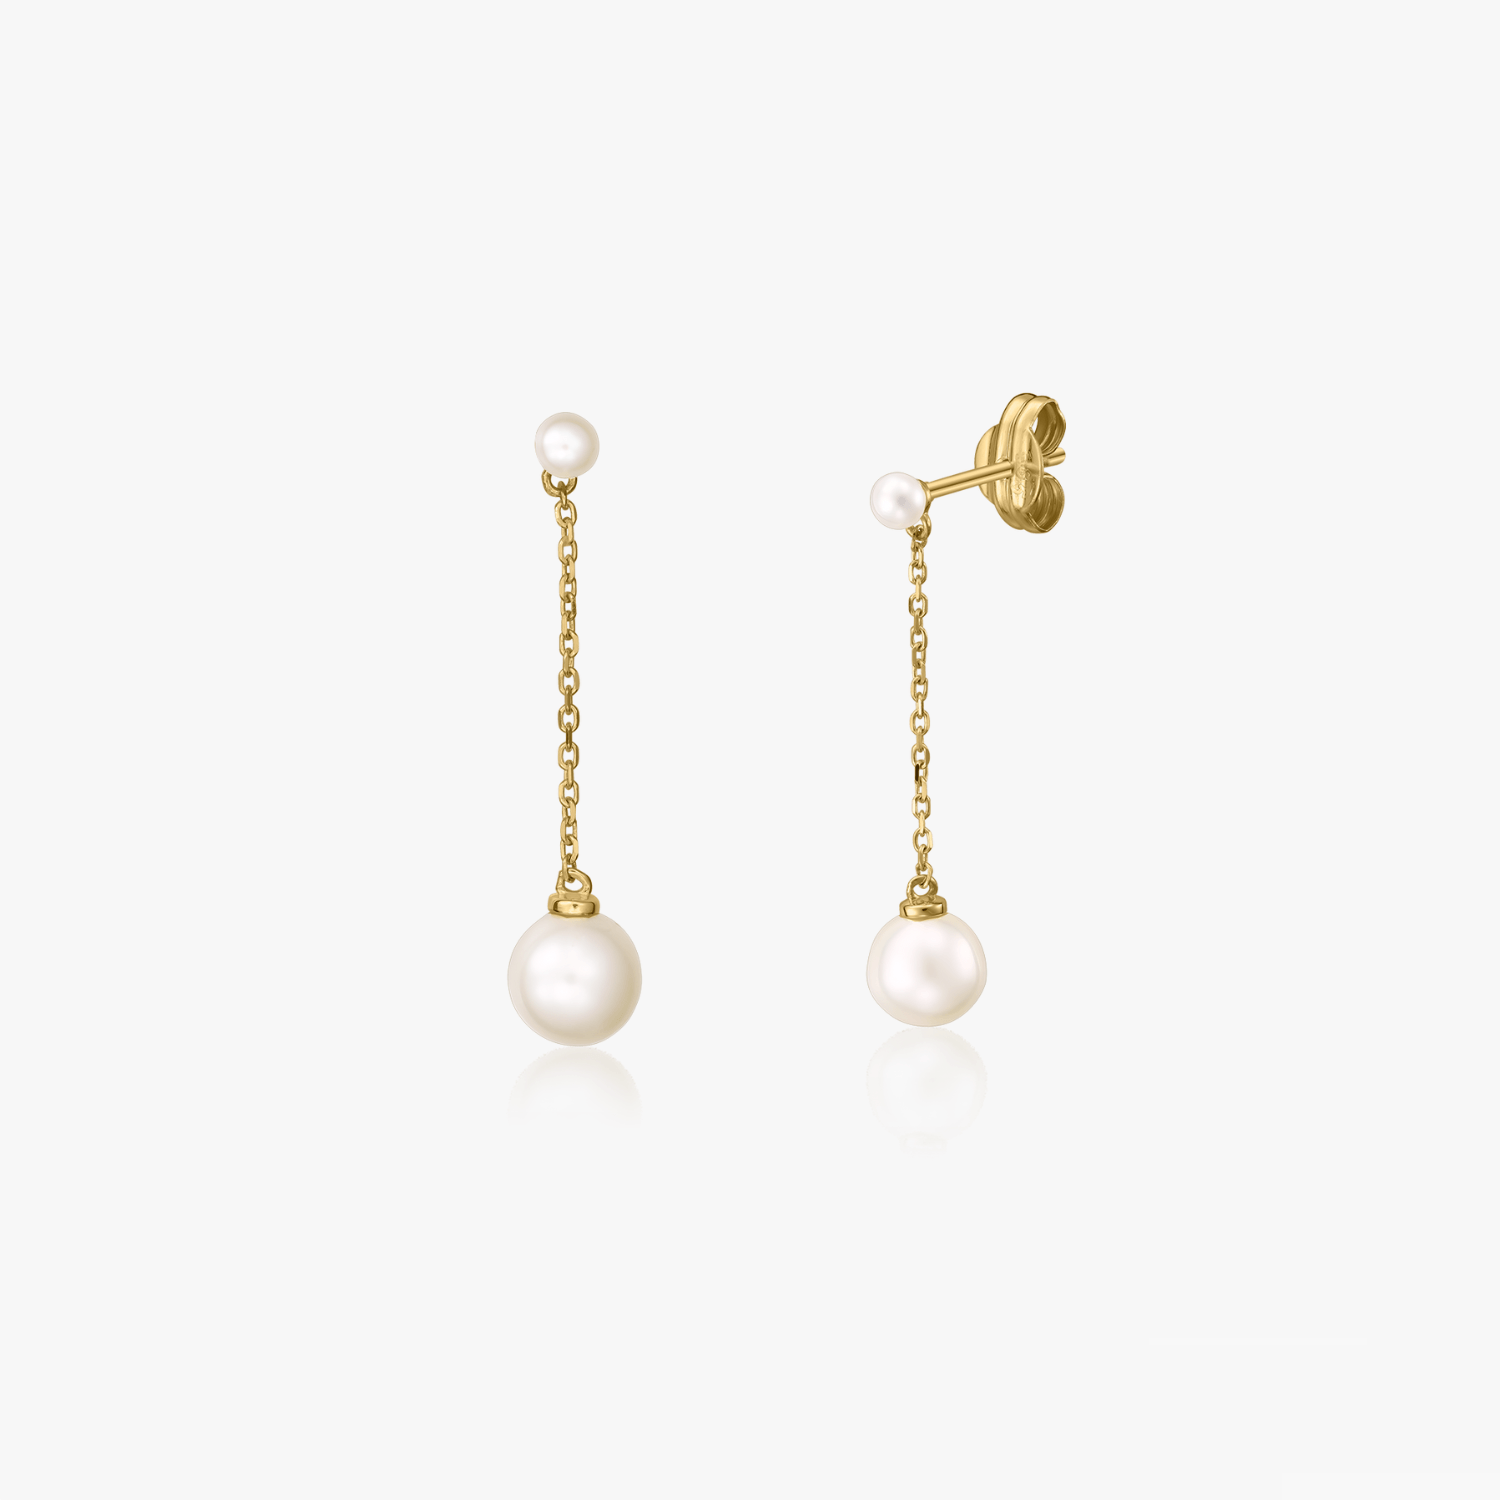 Sia gold earrings - Natural Pearls